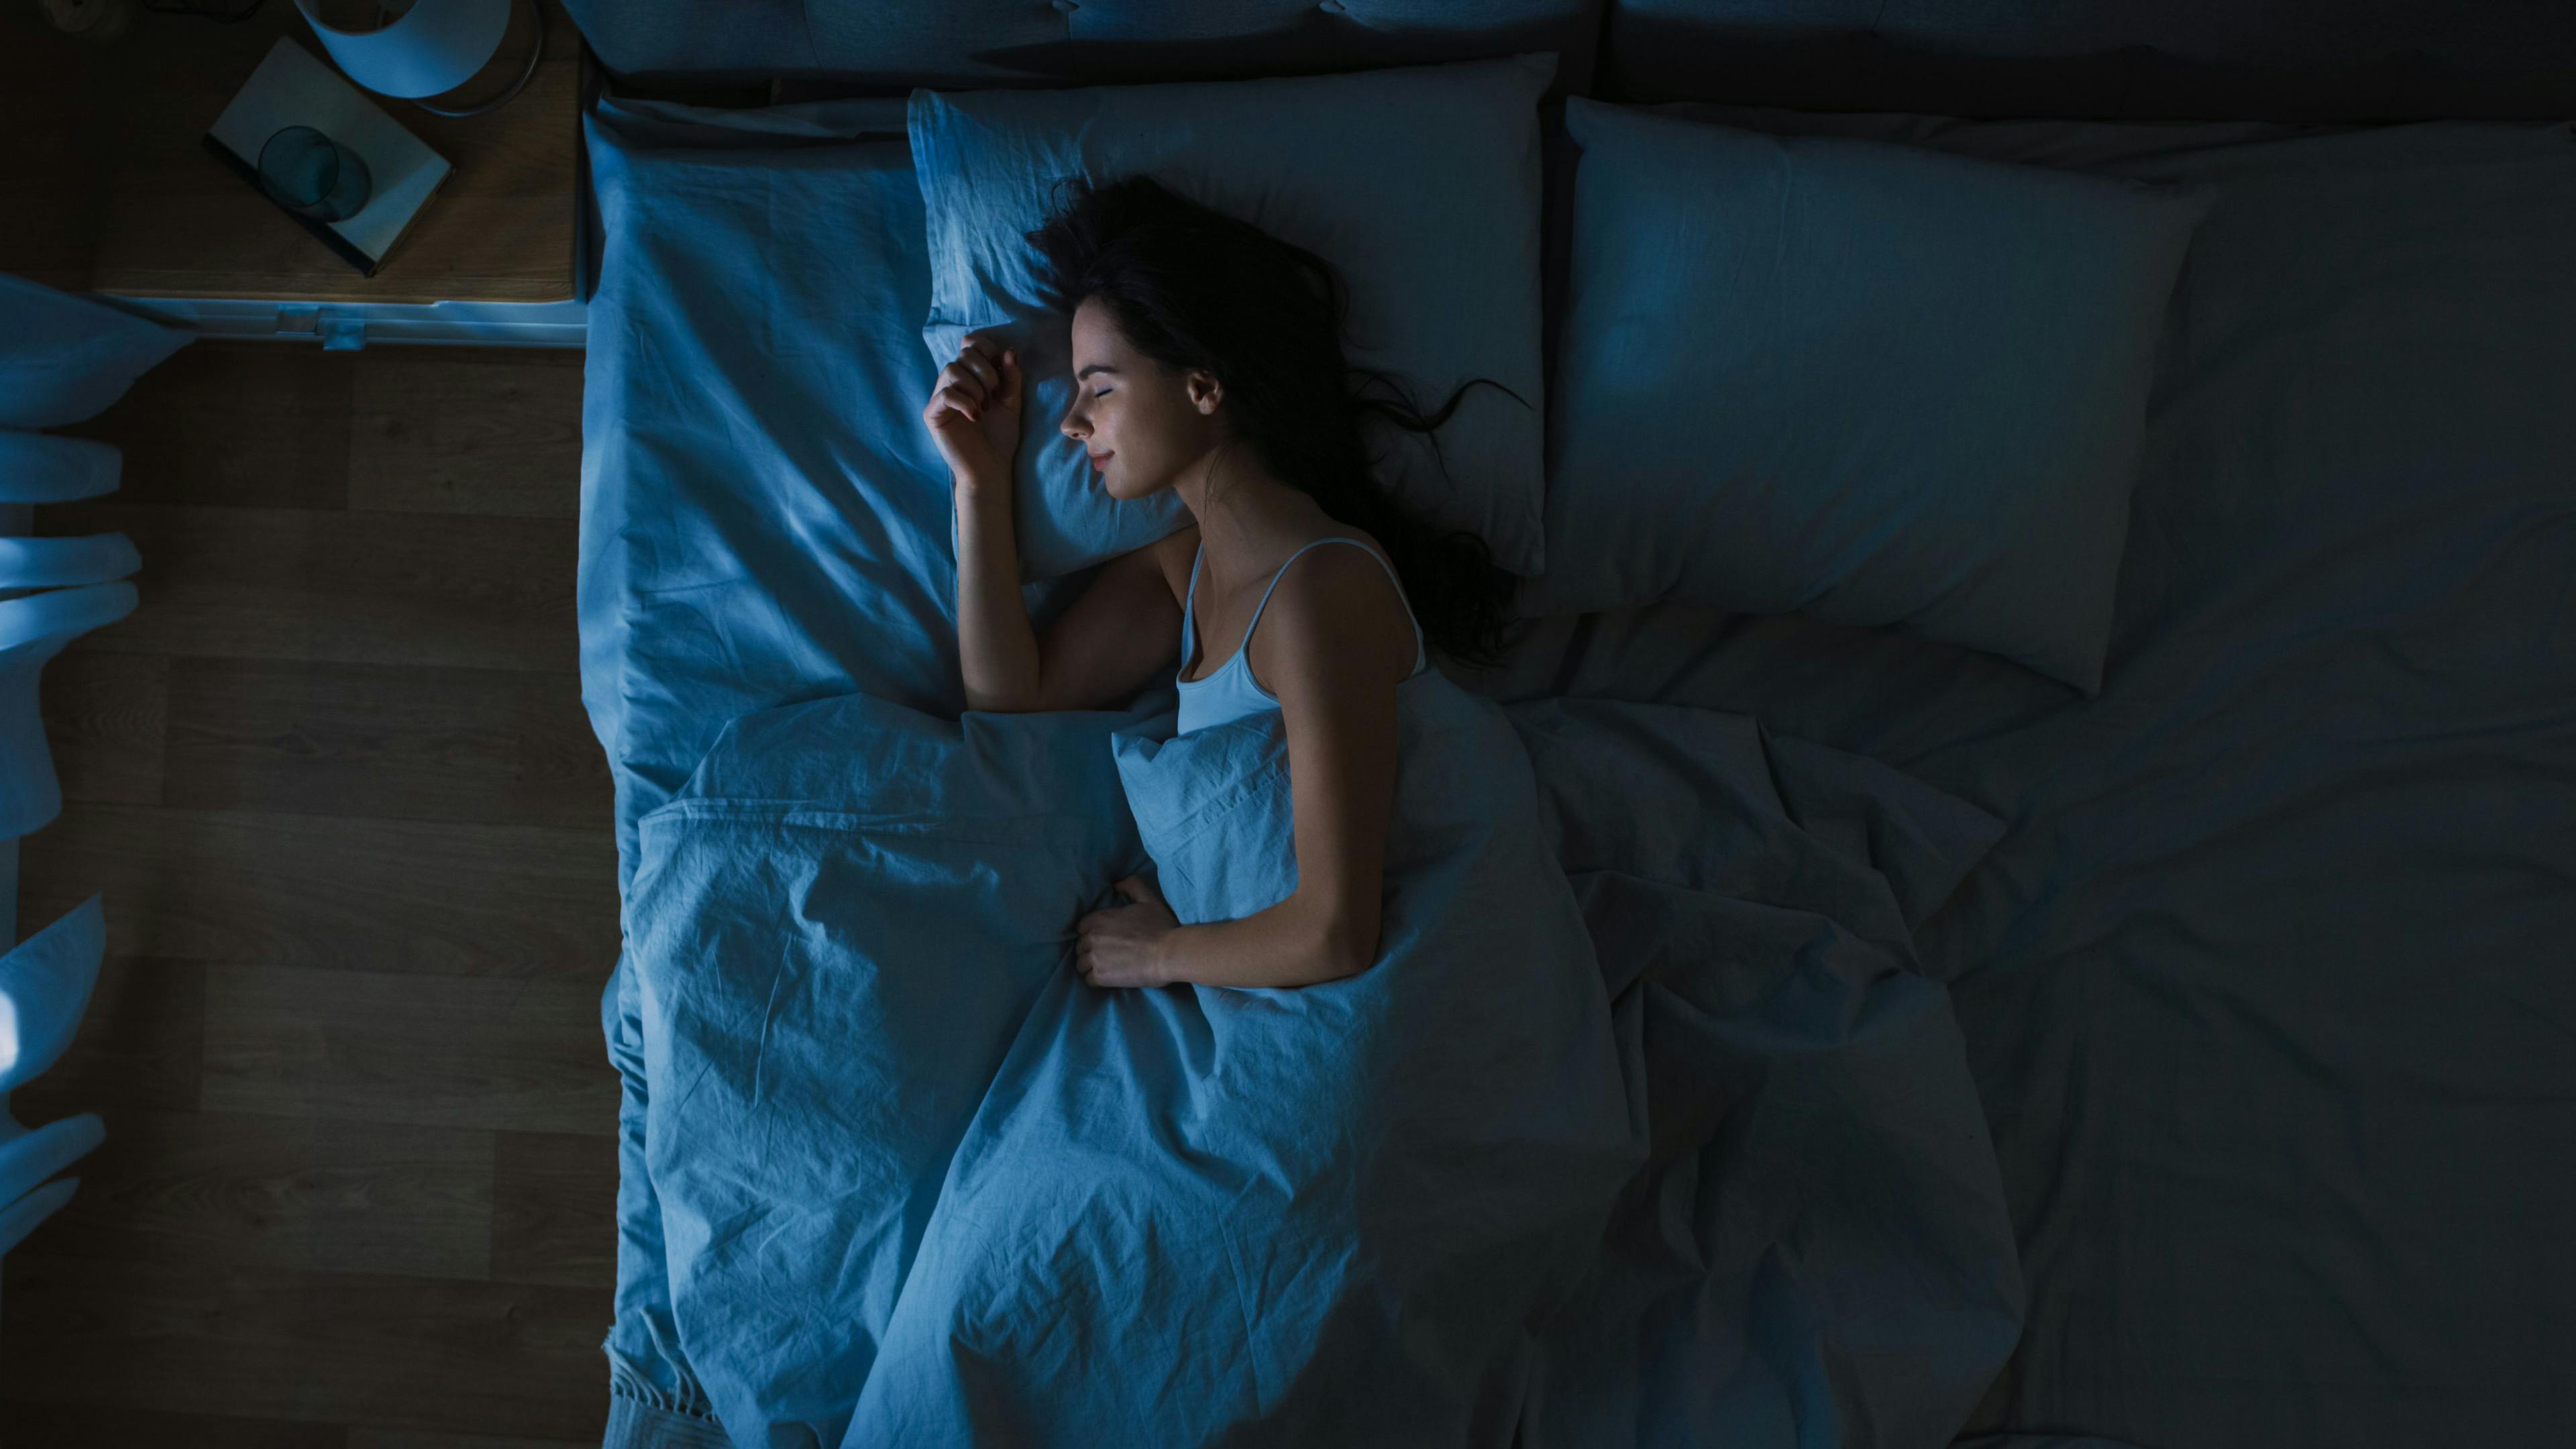 Top View of Young Woman Sleeping Cozily on a Bed in Bedroom at Night